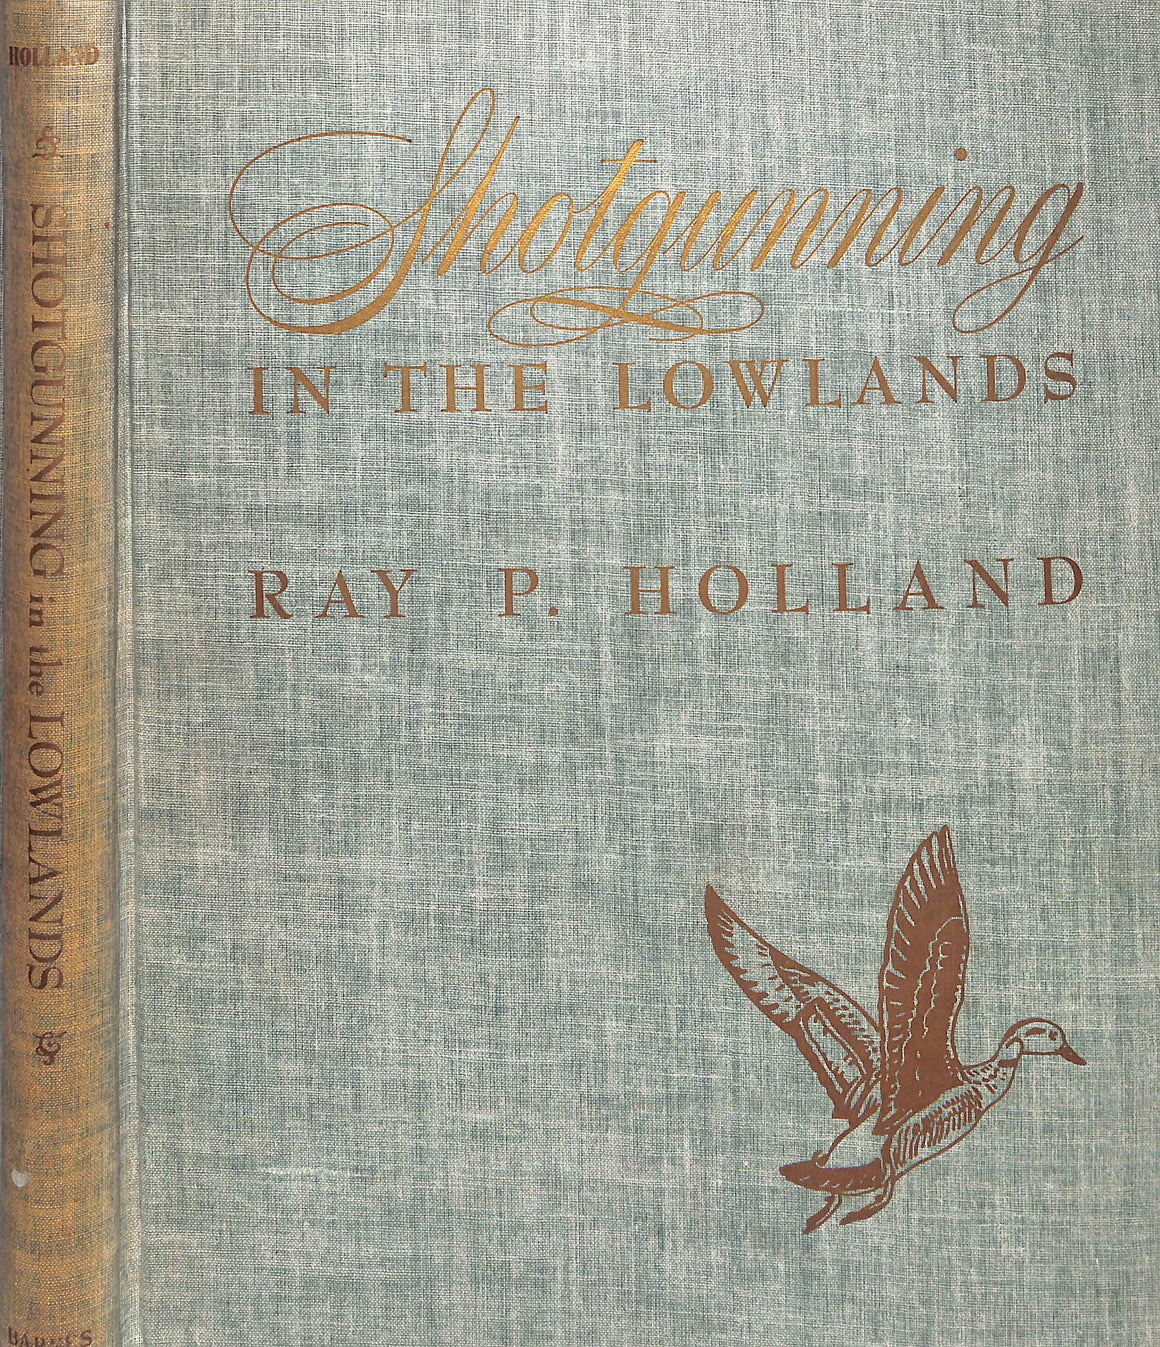 "Shotgunning In The Lowlands" 1945 HOLLAND, Ray P.